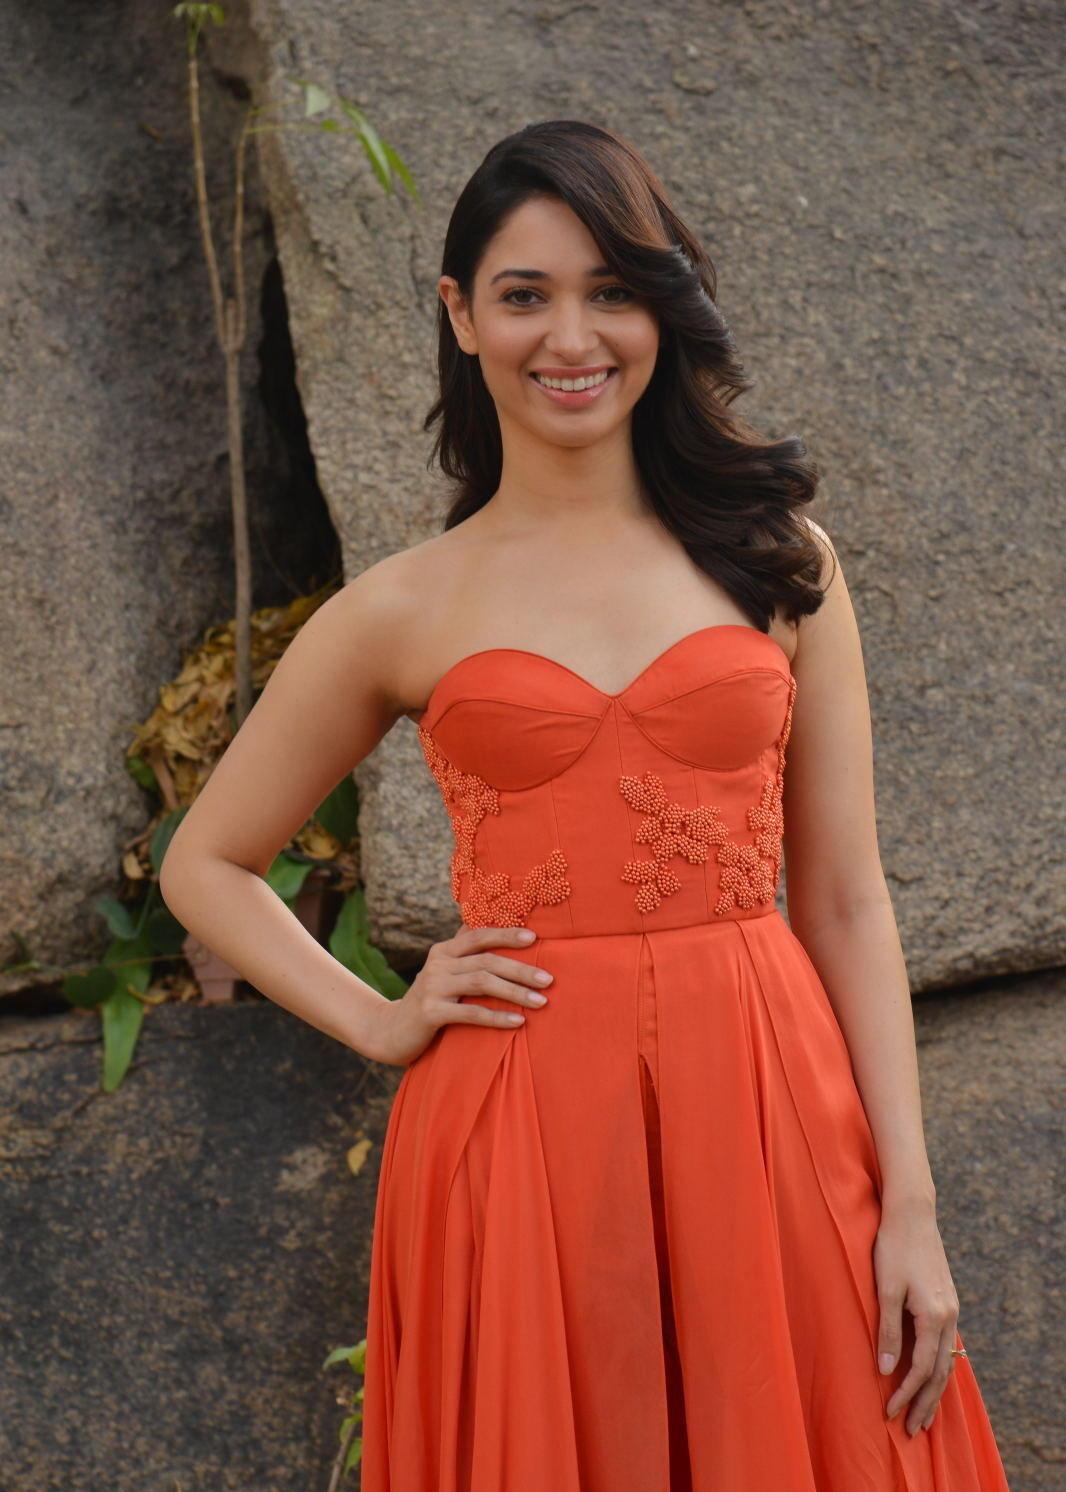 High Quality Bollywood Celebrity Pictures Tamannaah Bhatia Looks Super Sexy In A Orange